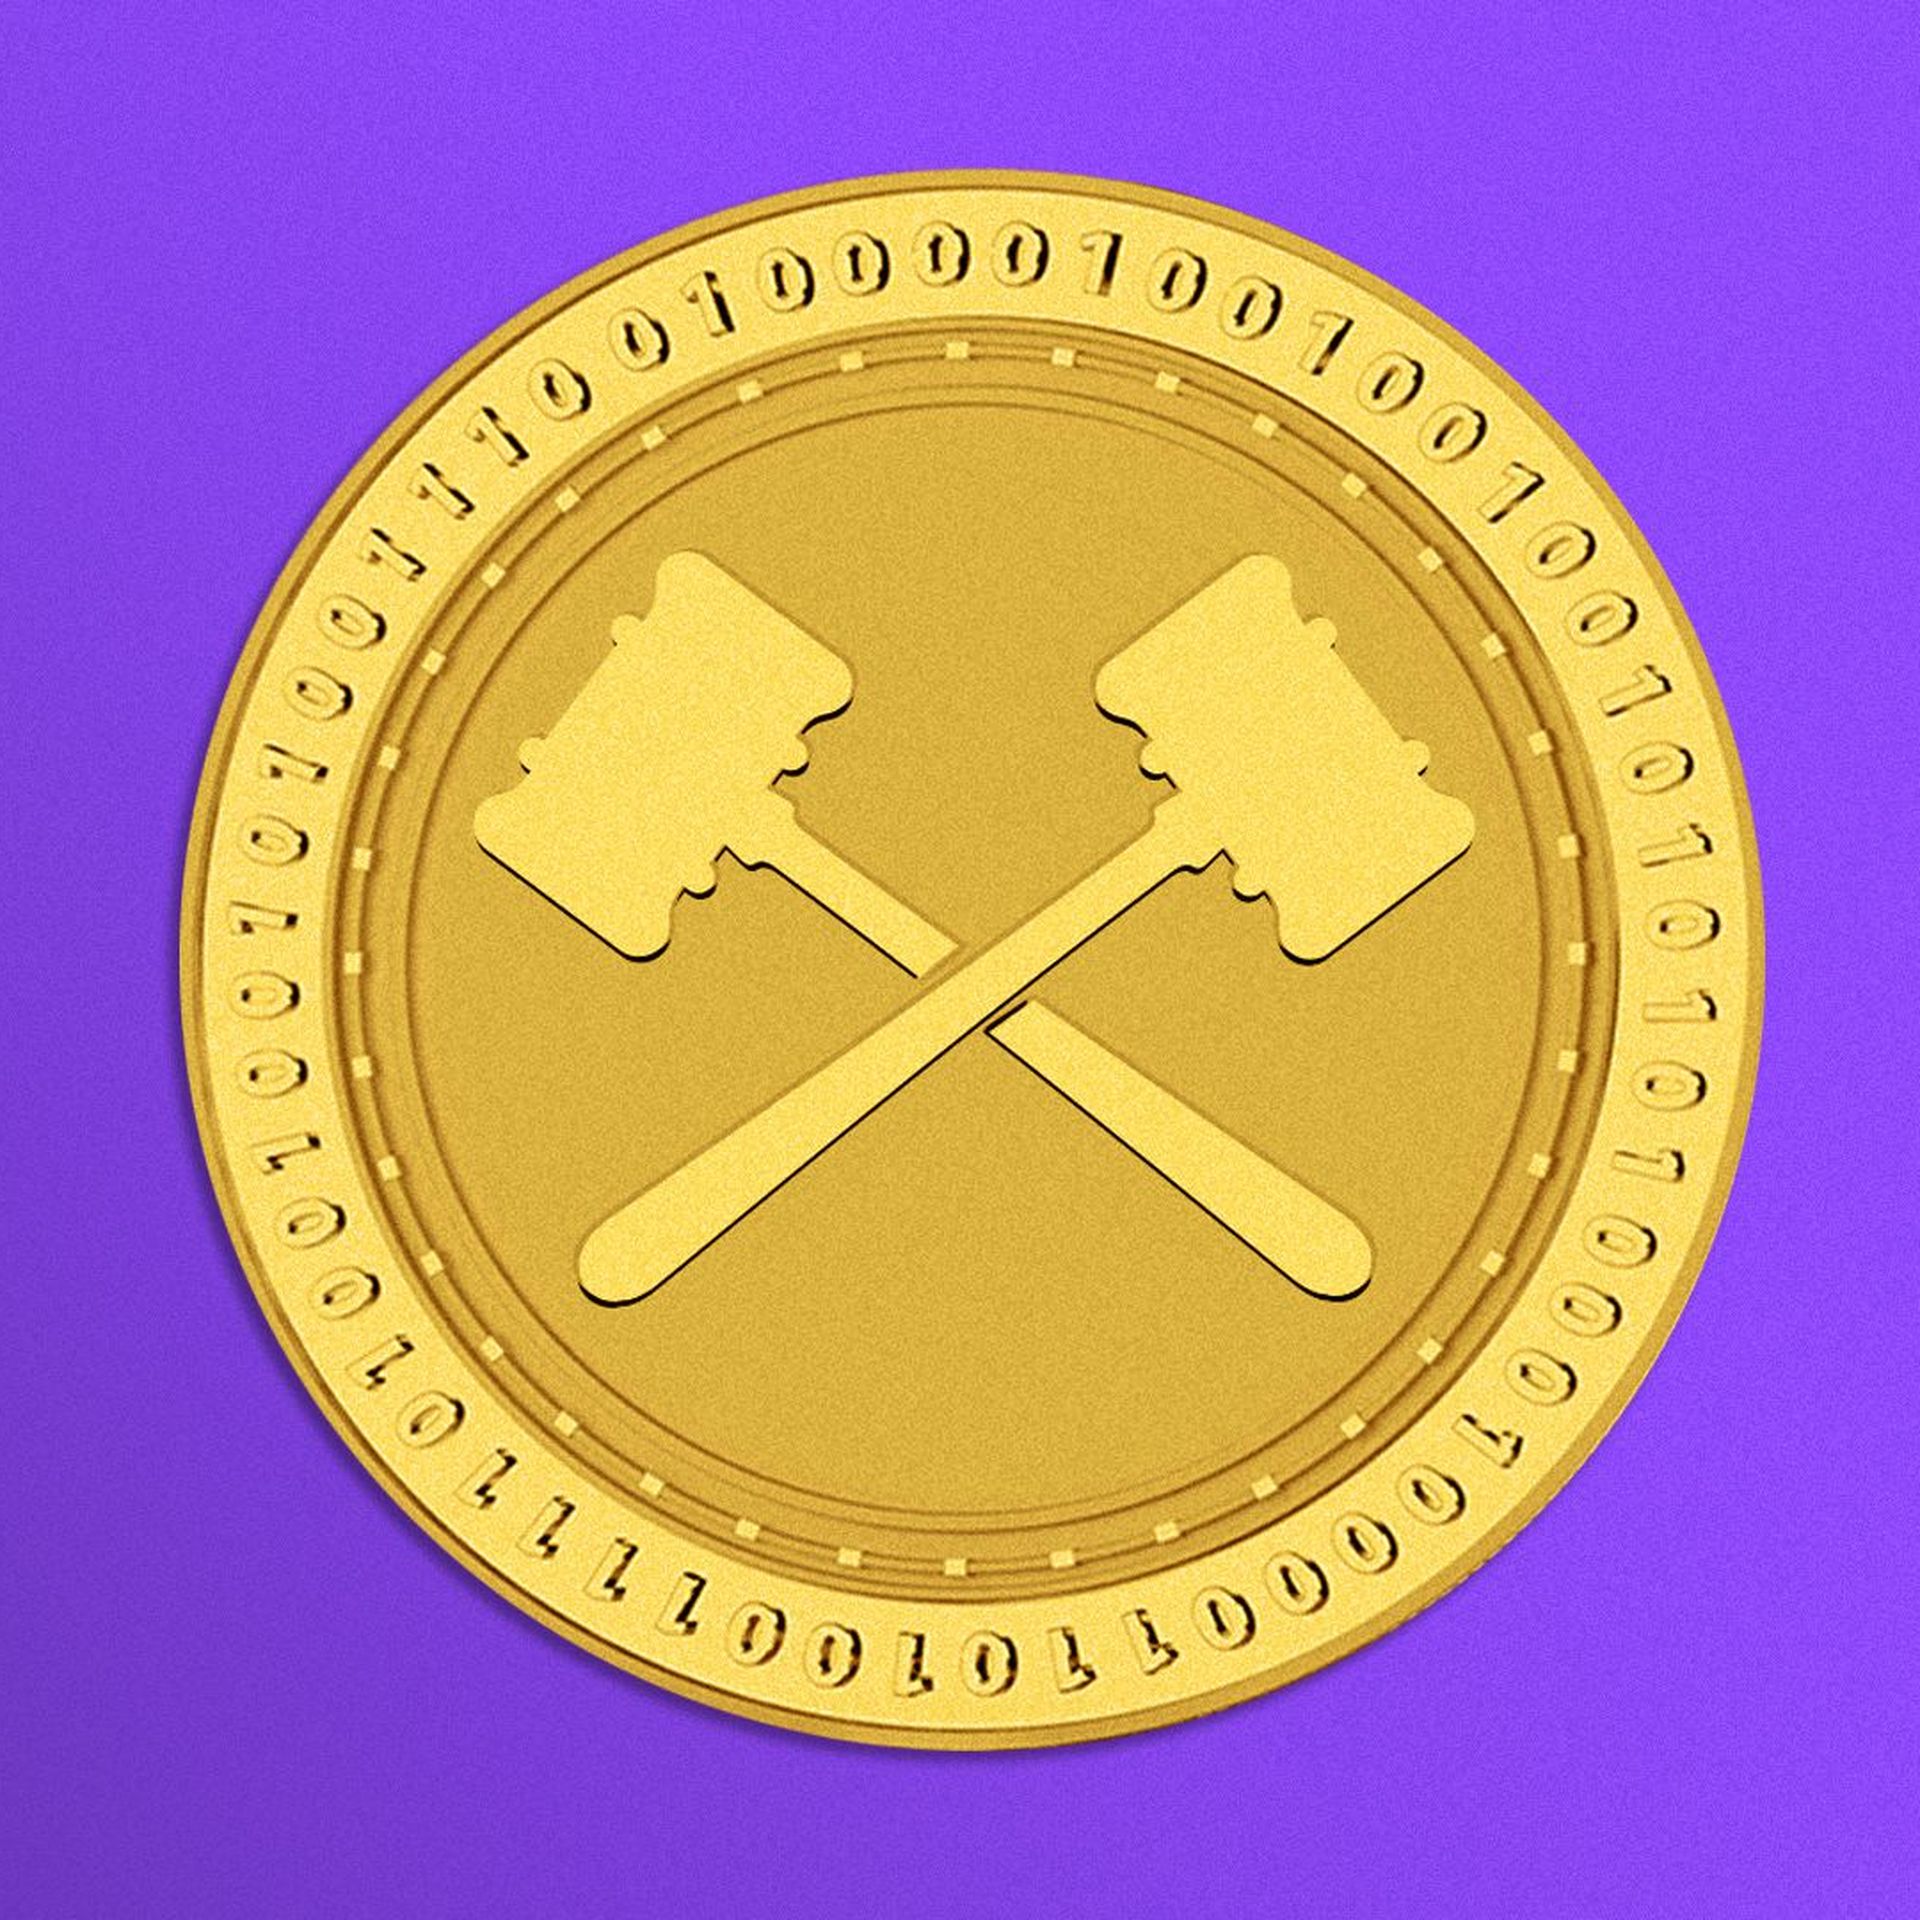 Illustration of a crypto coin with crossed gavels on it. 